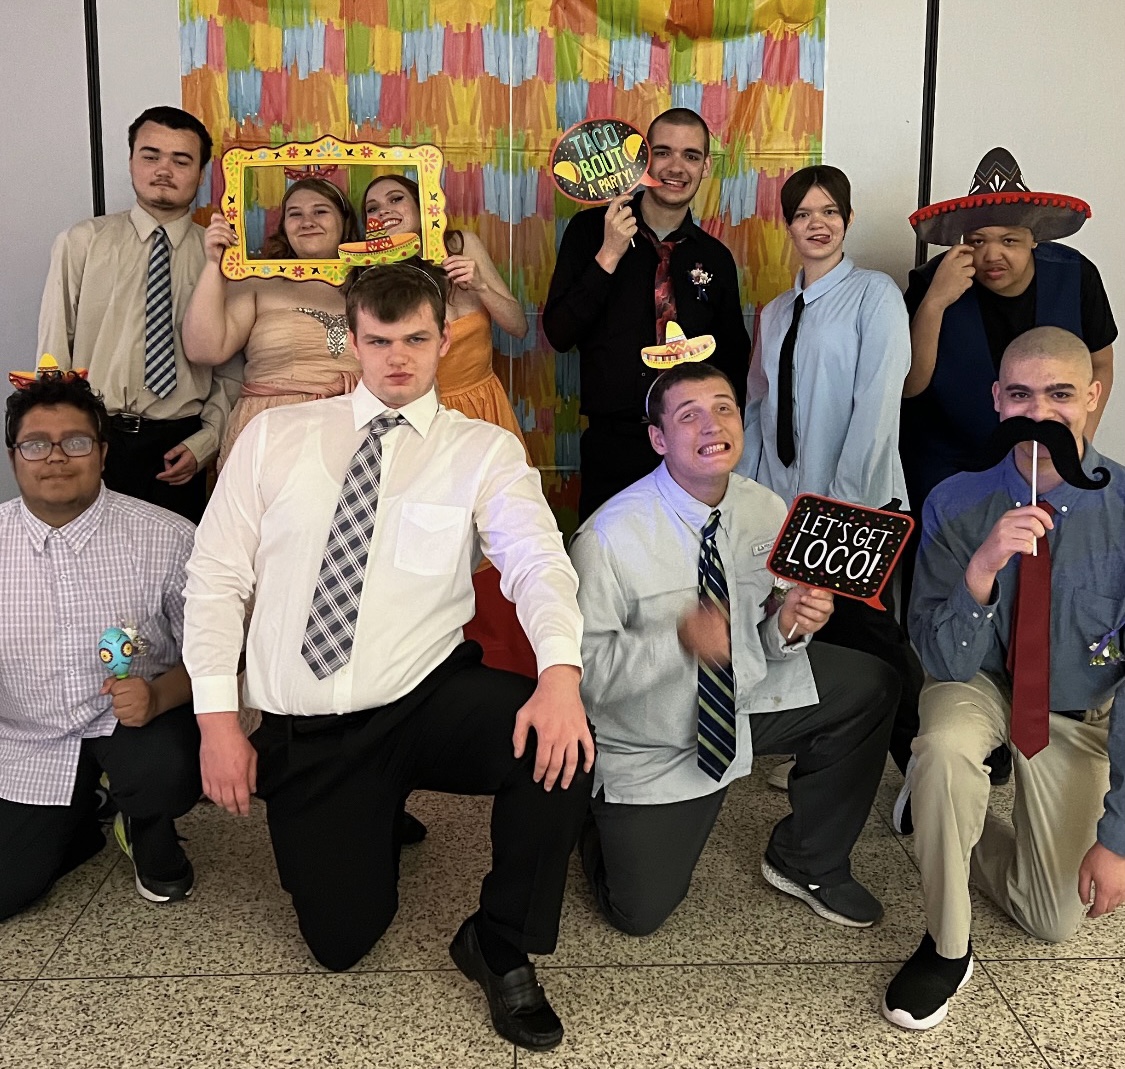 Ms. Karausky and Mr. Murphy’s Classes Host Annual Prom